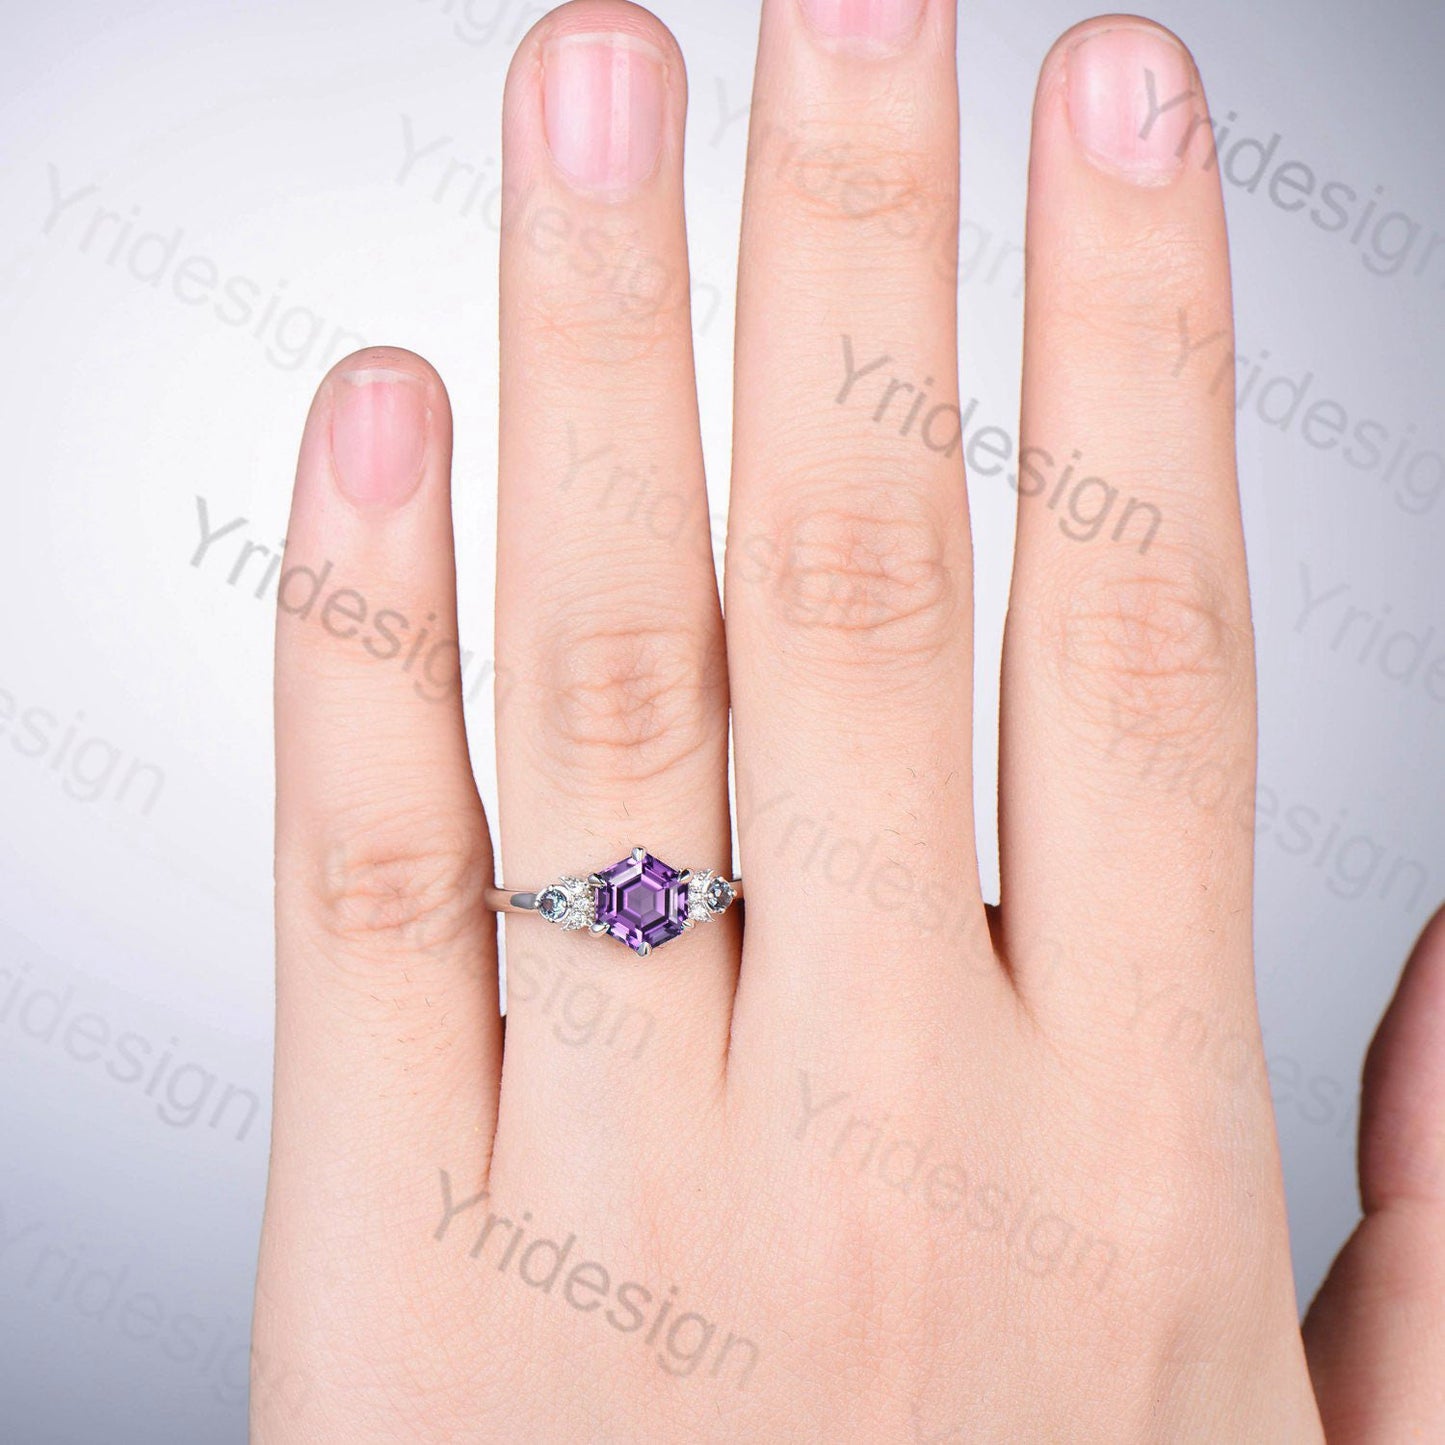 Unique hexagon amethyst engagement ring white gold Magic celestial moon Feb birthstone promise ring vintage crescent wedding ring gift women - PENFINE